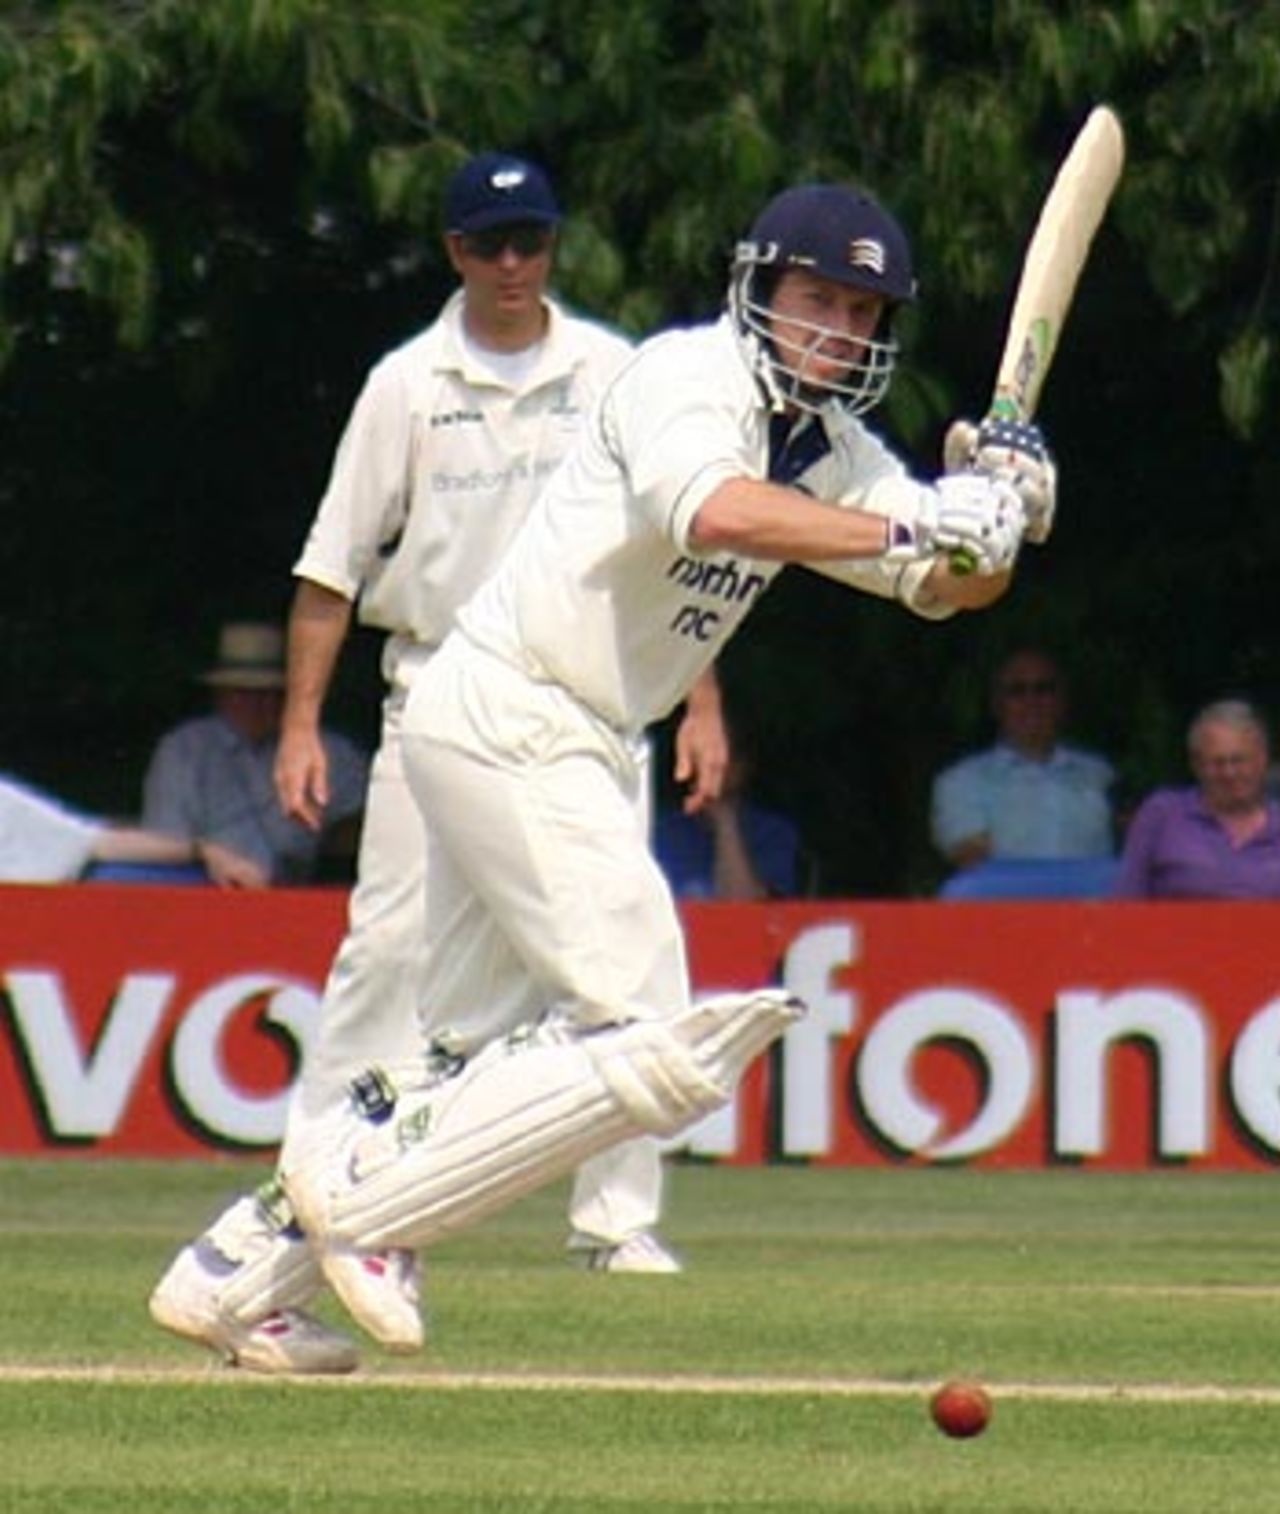 Ed Joyce on his way to a big hundred, Middlesex v Yorkshire, Southgate, June 8, 2006